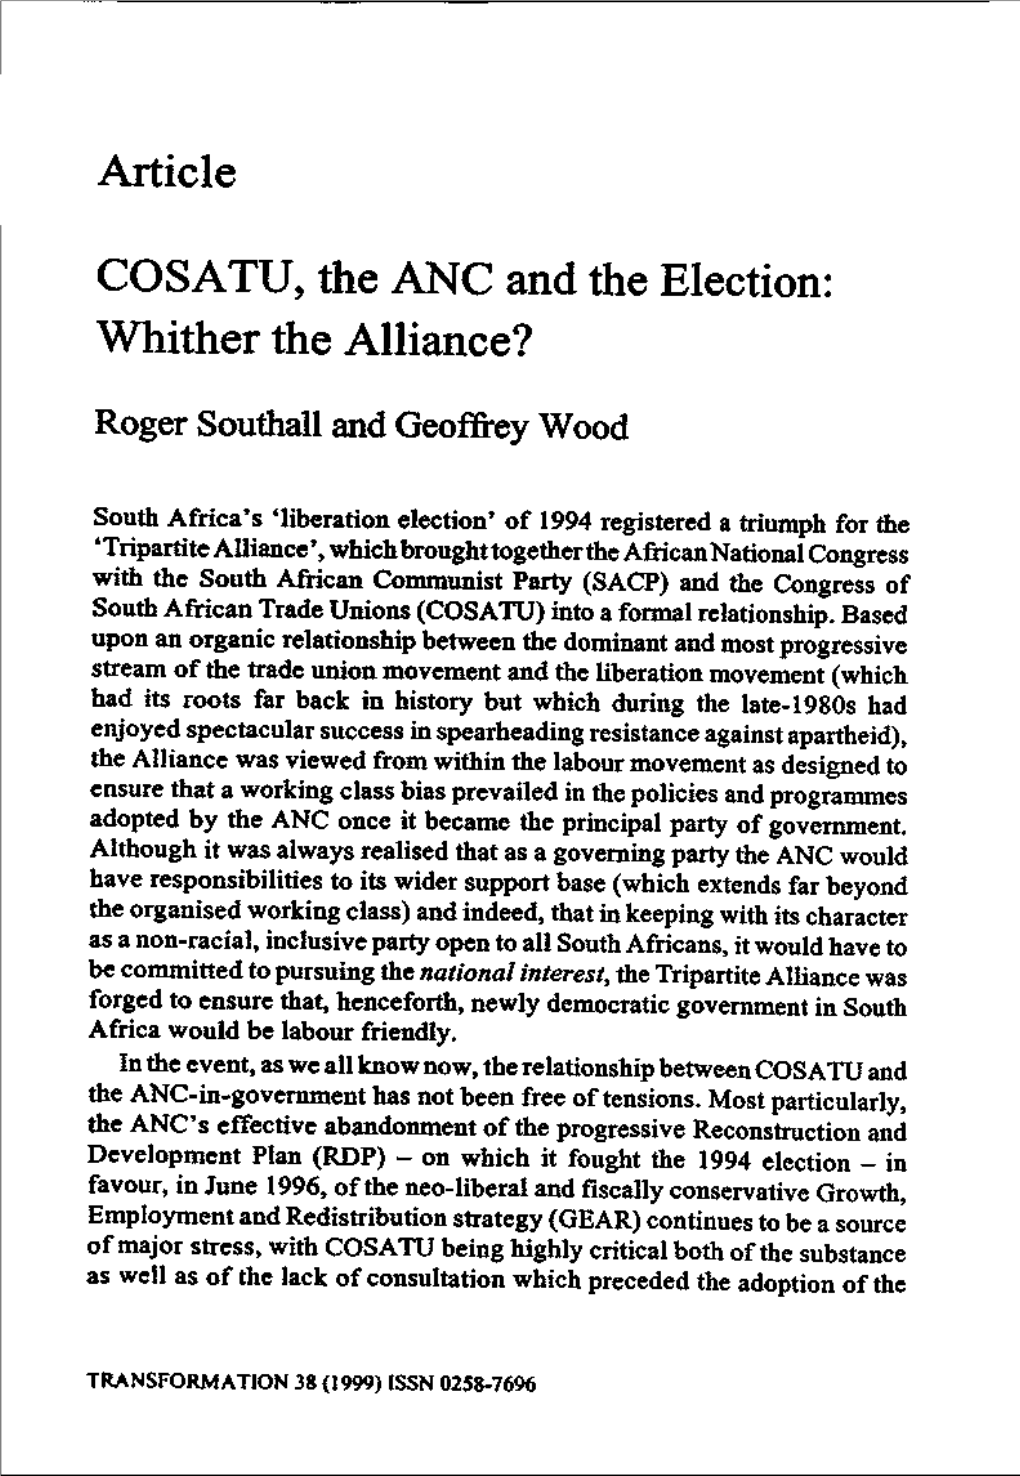 Article COSATU, the ANC and the Election